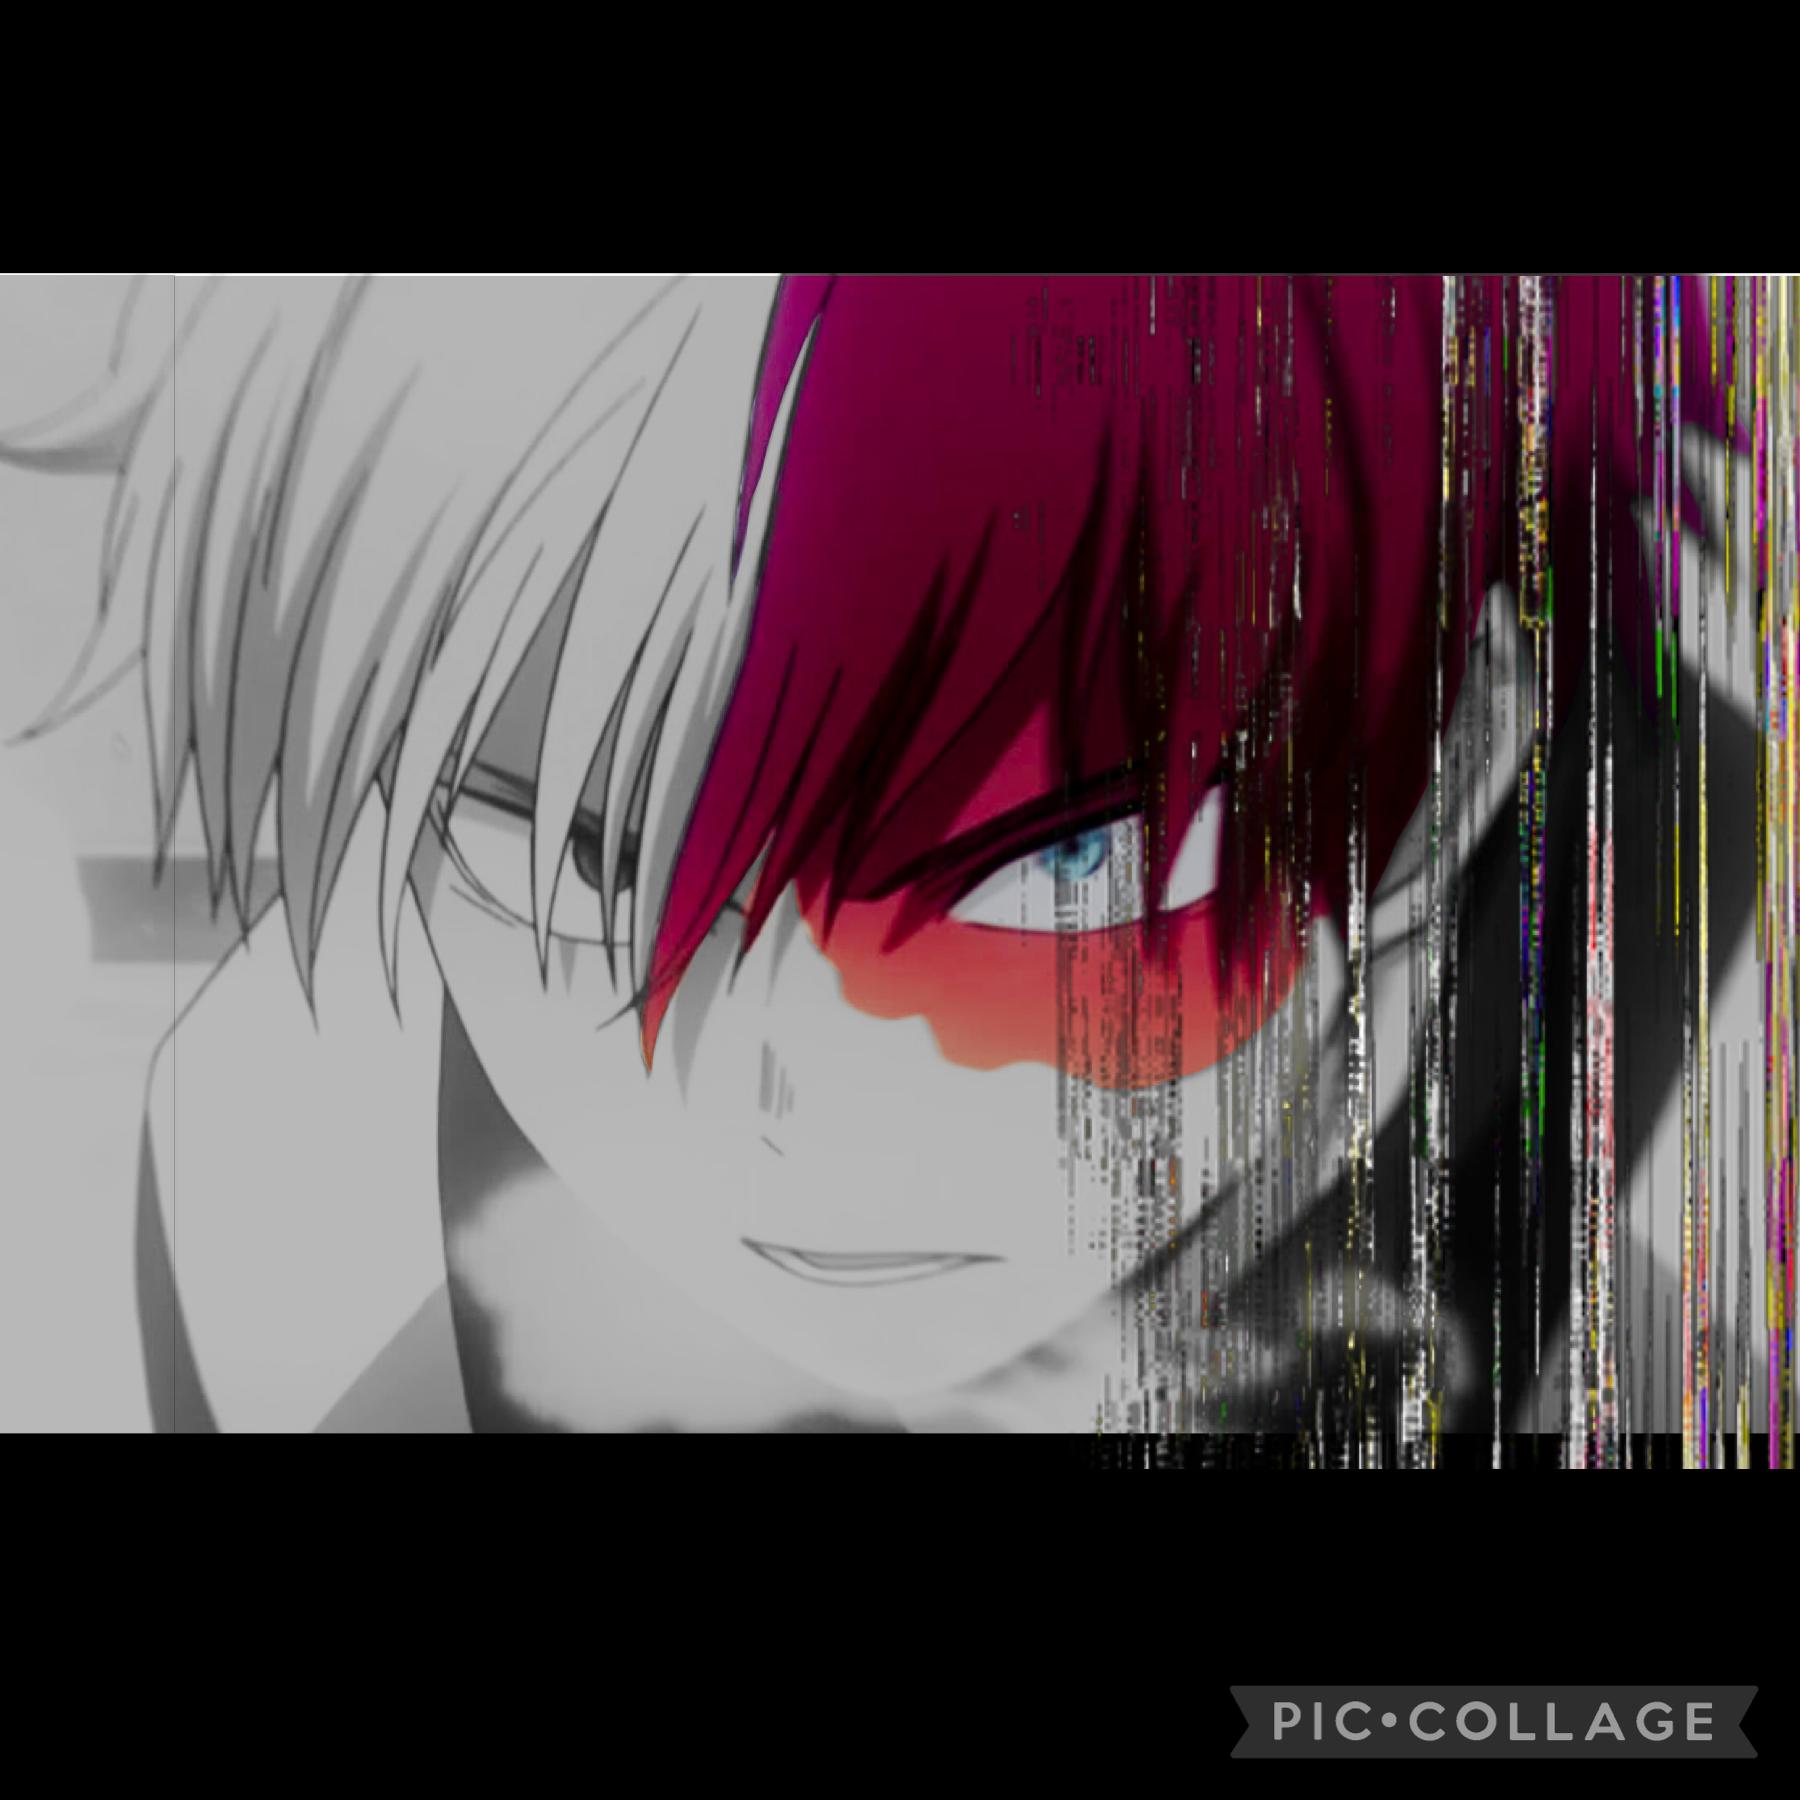 another shouto! Just glitched.